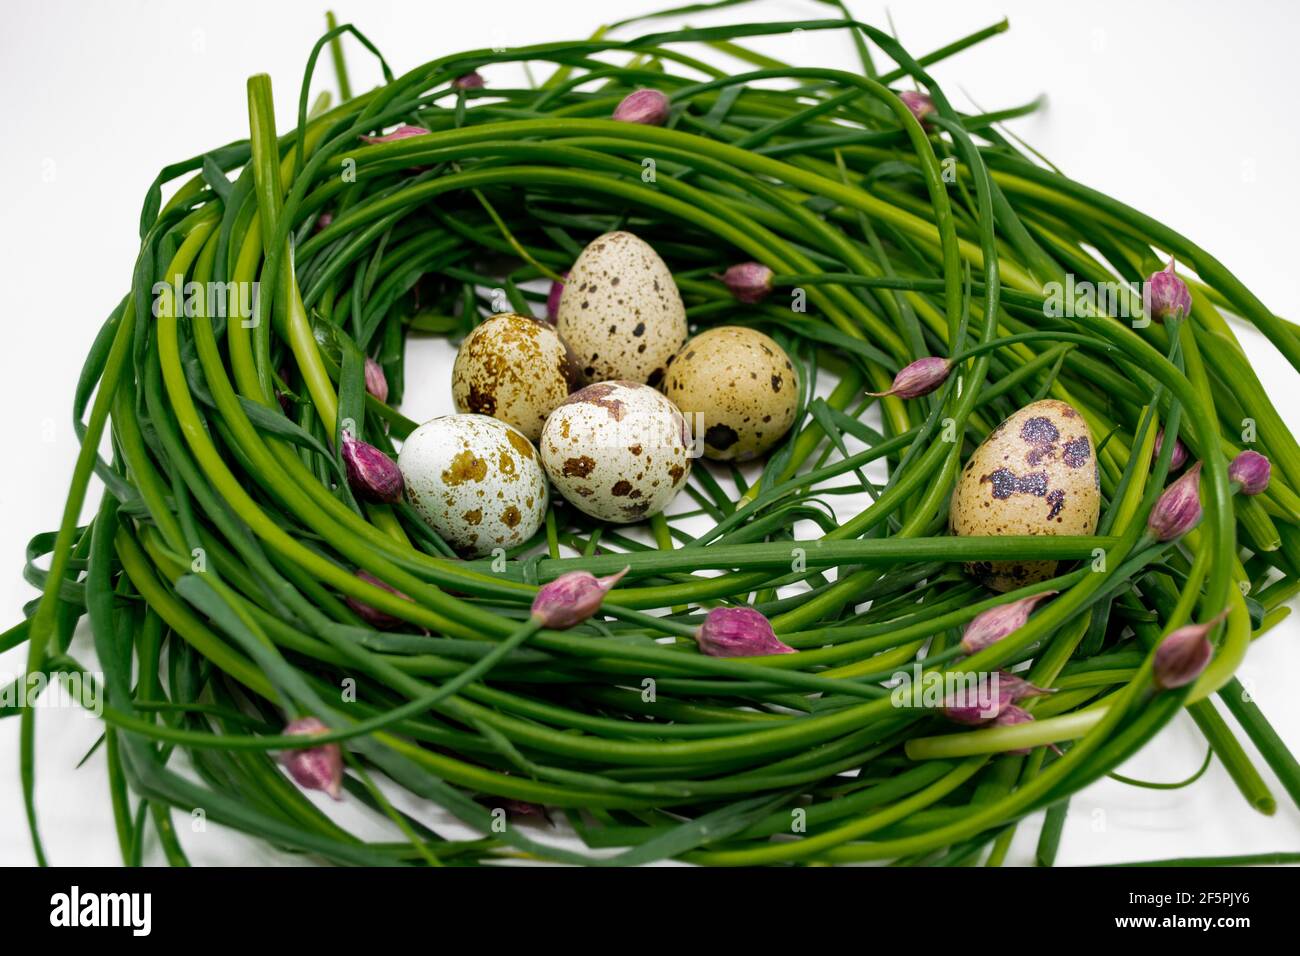 Green onions with pink buds are laid out in the form of a nest, in which quail eggs lie. Organic Easter Concept. Stock Photo